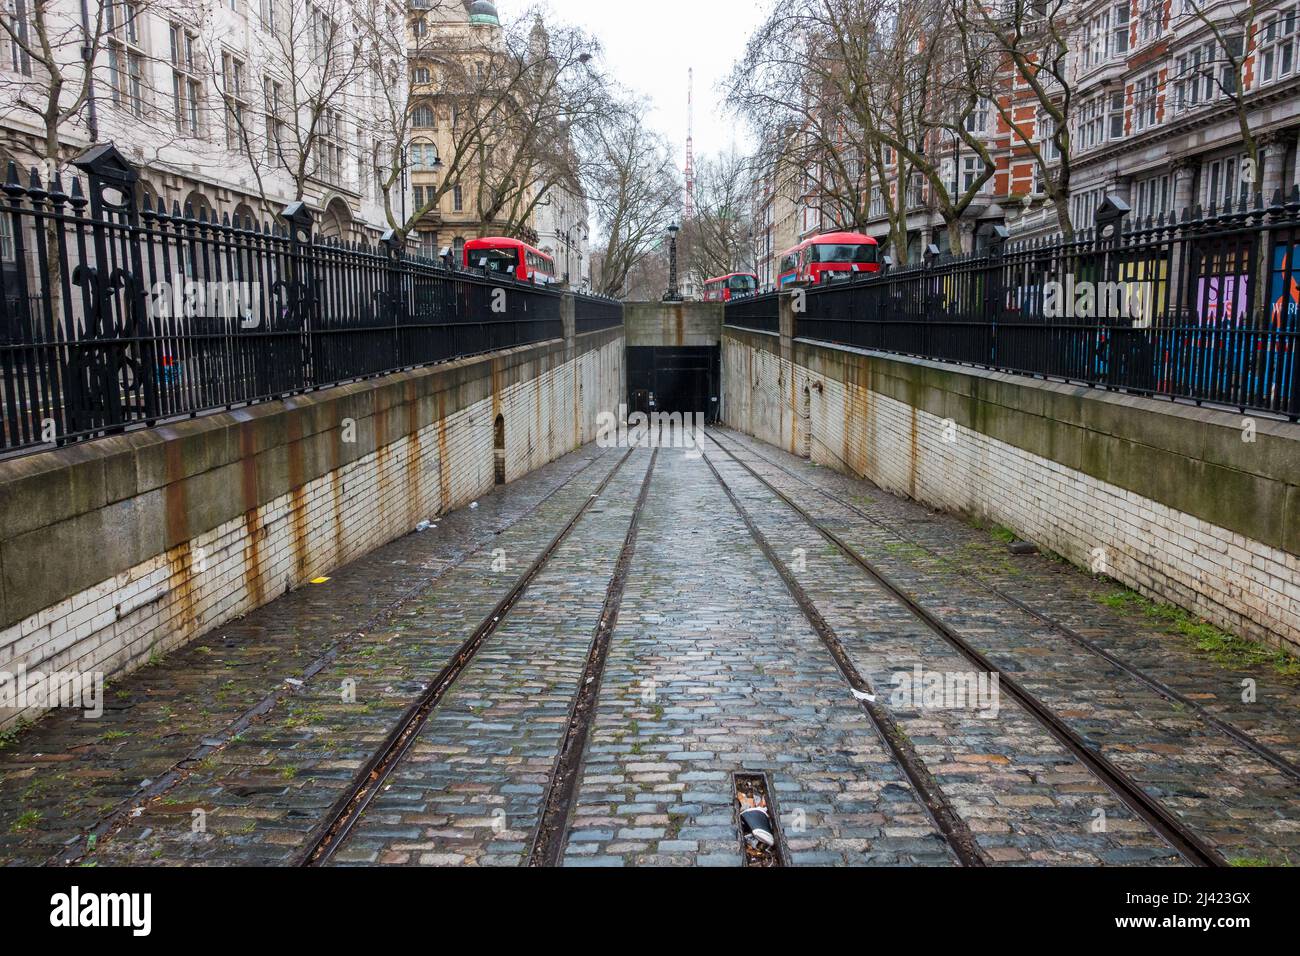 Entrance to the disused Kingsway Tram Subway central London Stock Photo